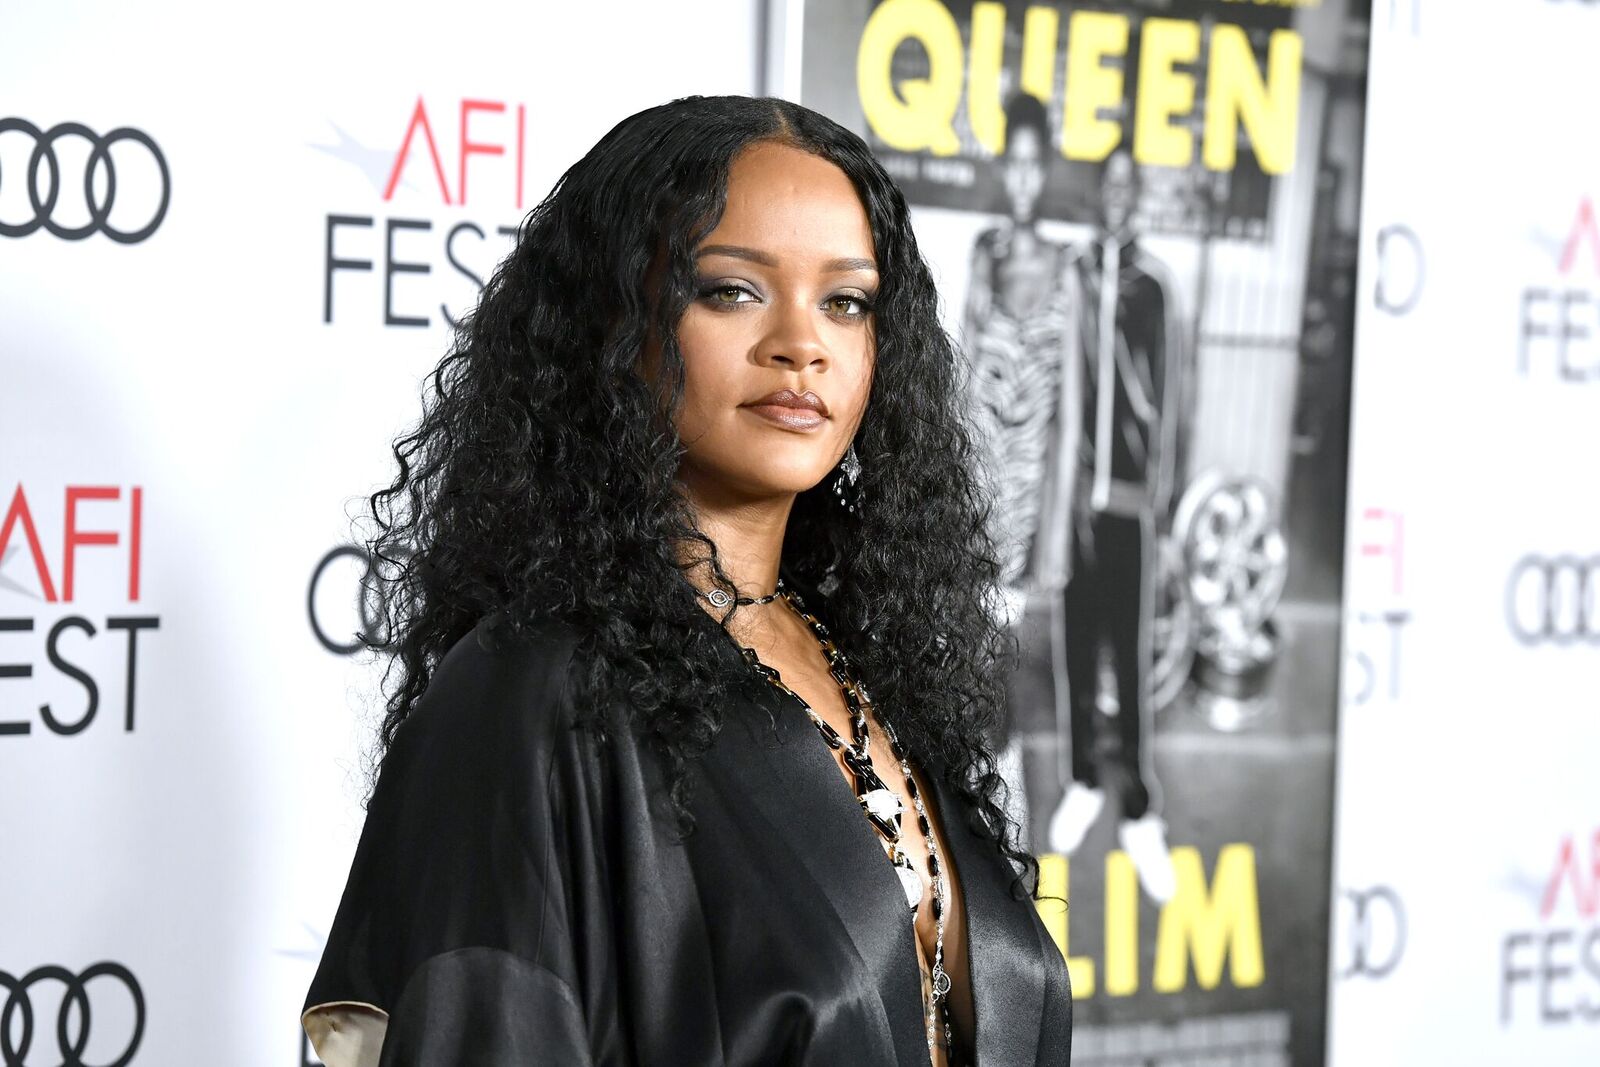 Rihanna attends the "Queen & Slim" Premiere at the TCL Chinese Theatre on November 14, 2019 | Photo: Getty Images